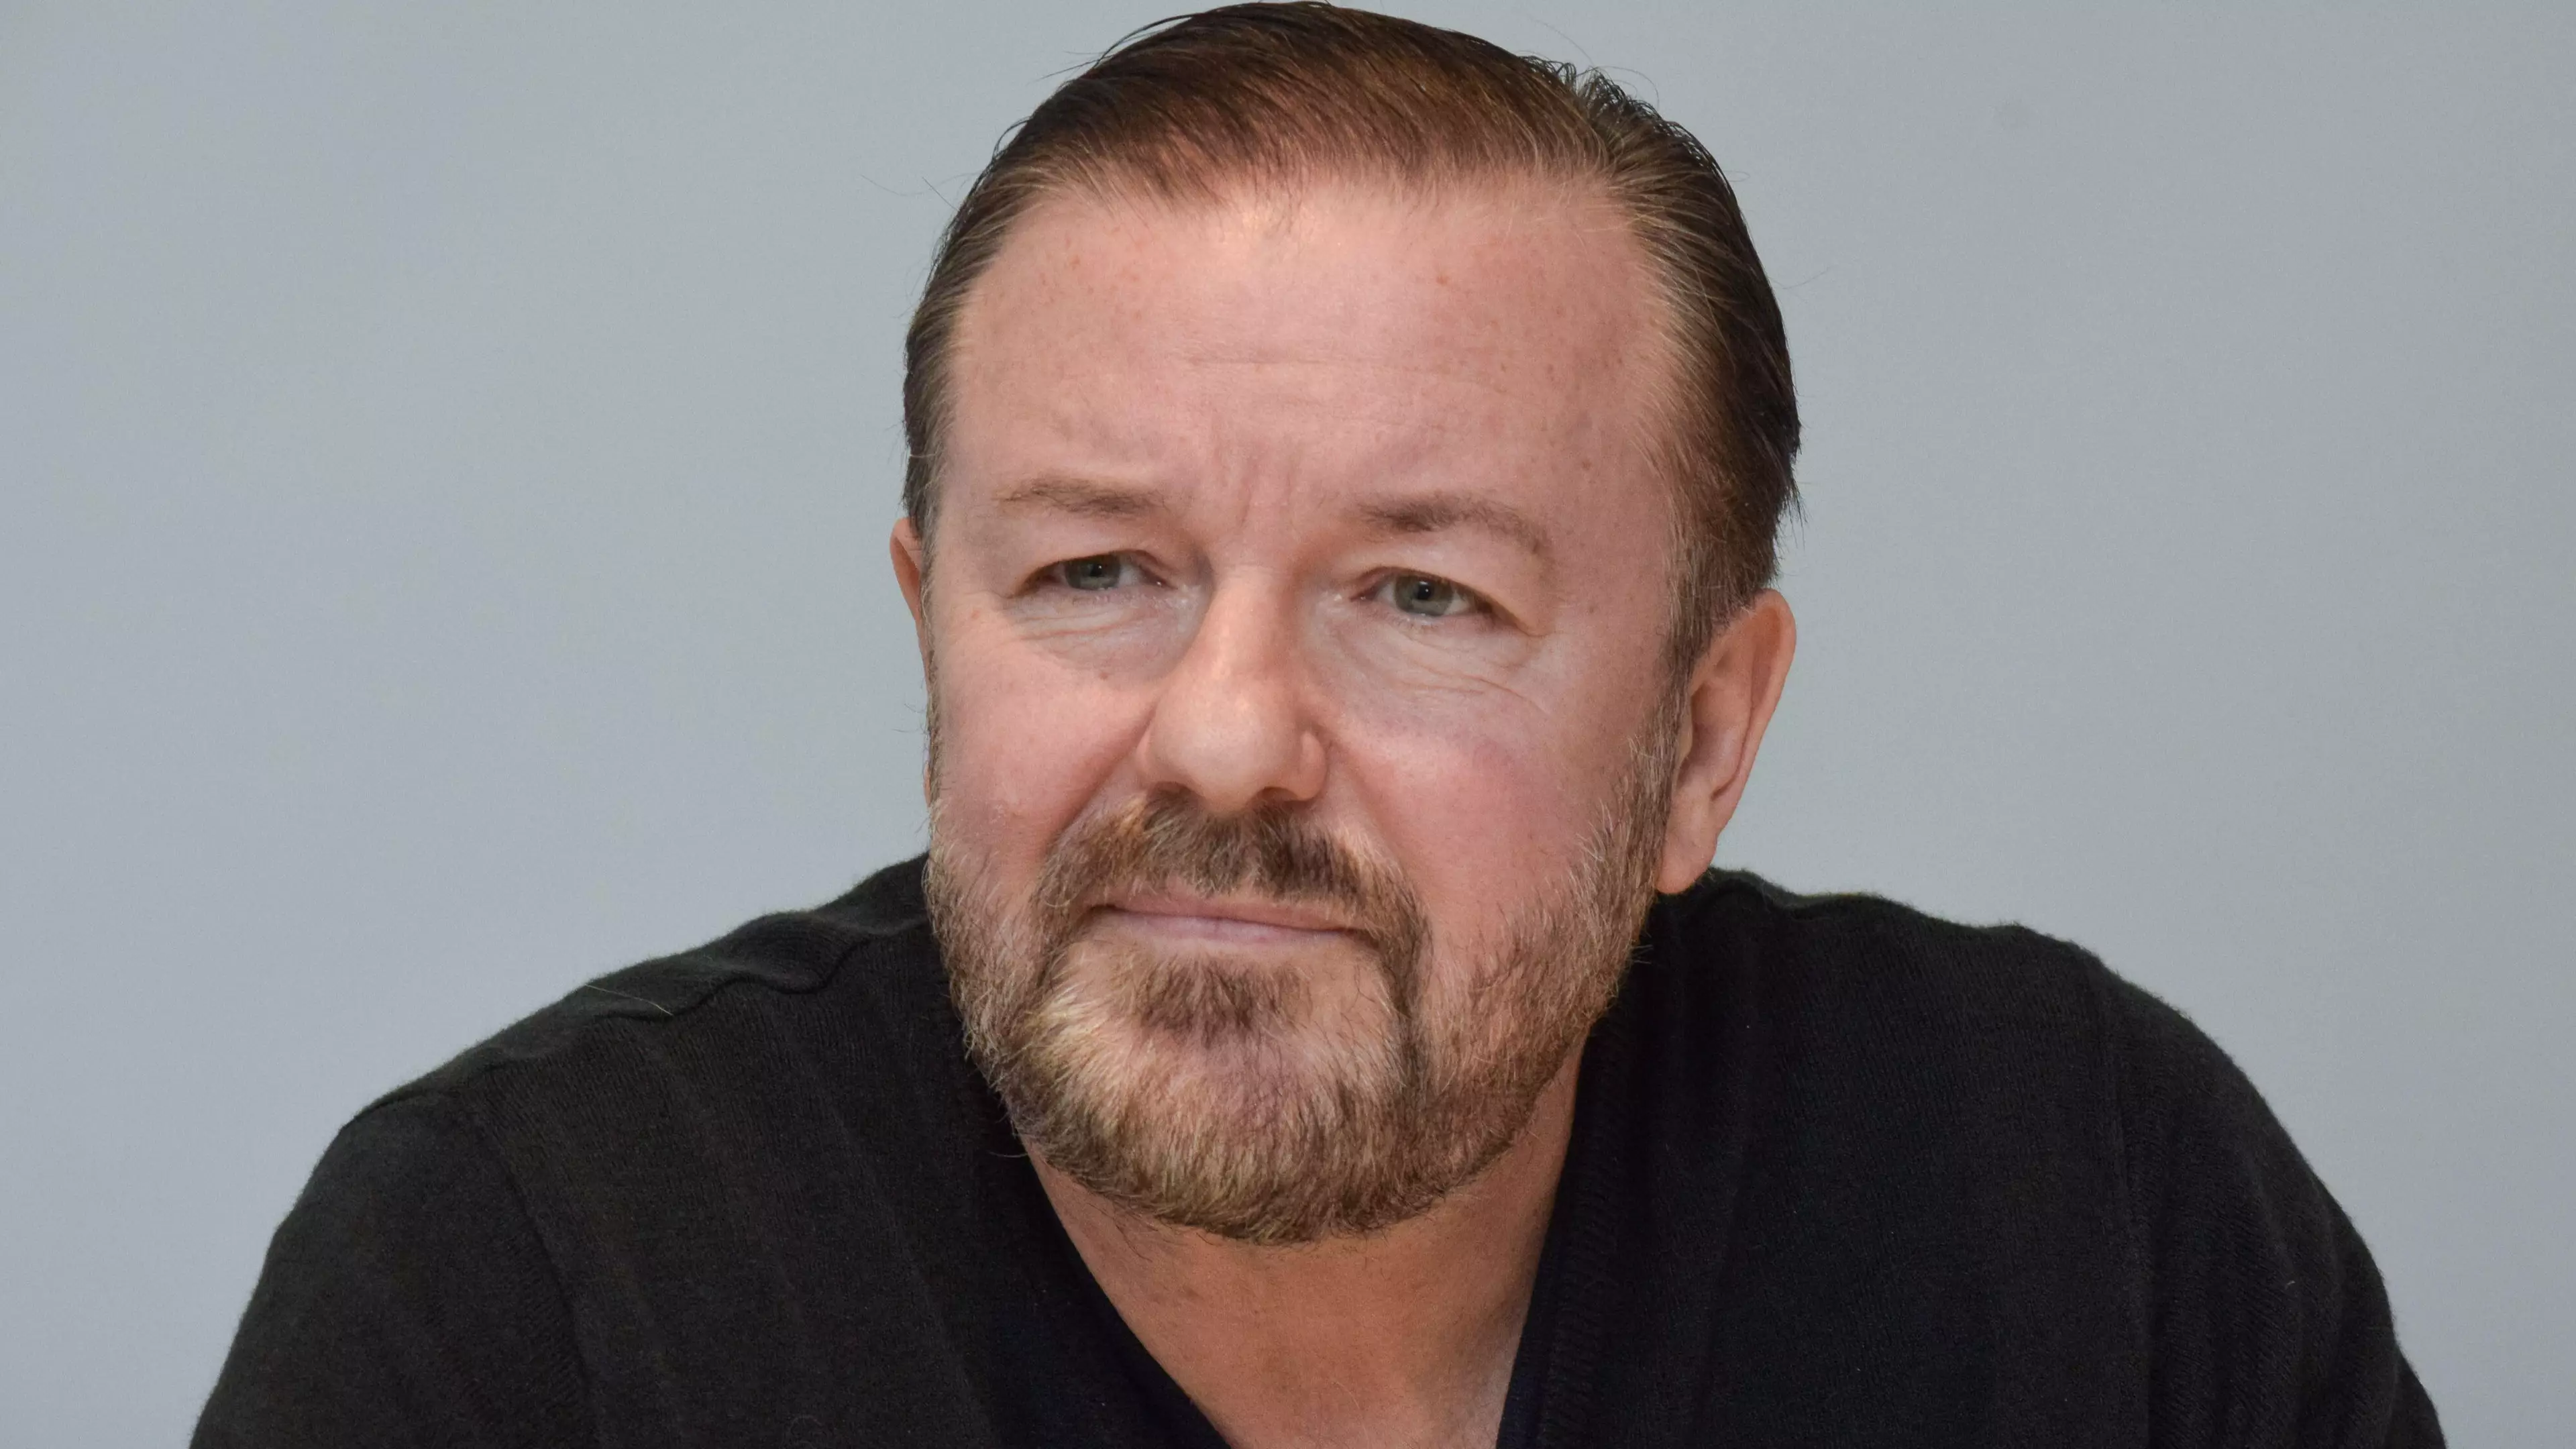 Ricky Gervais Wants To 'F******g Batter' Poachers Who Cut Off Rhino's Horn